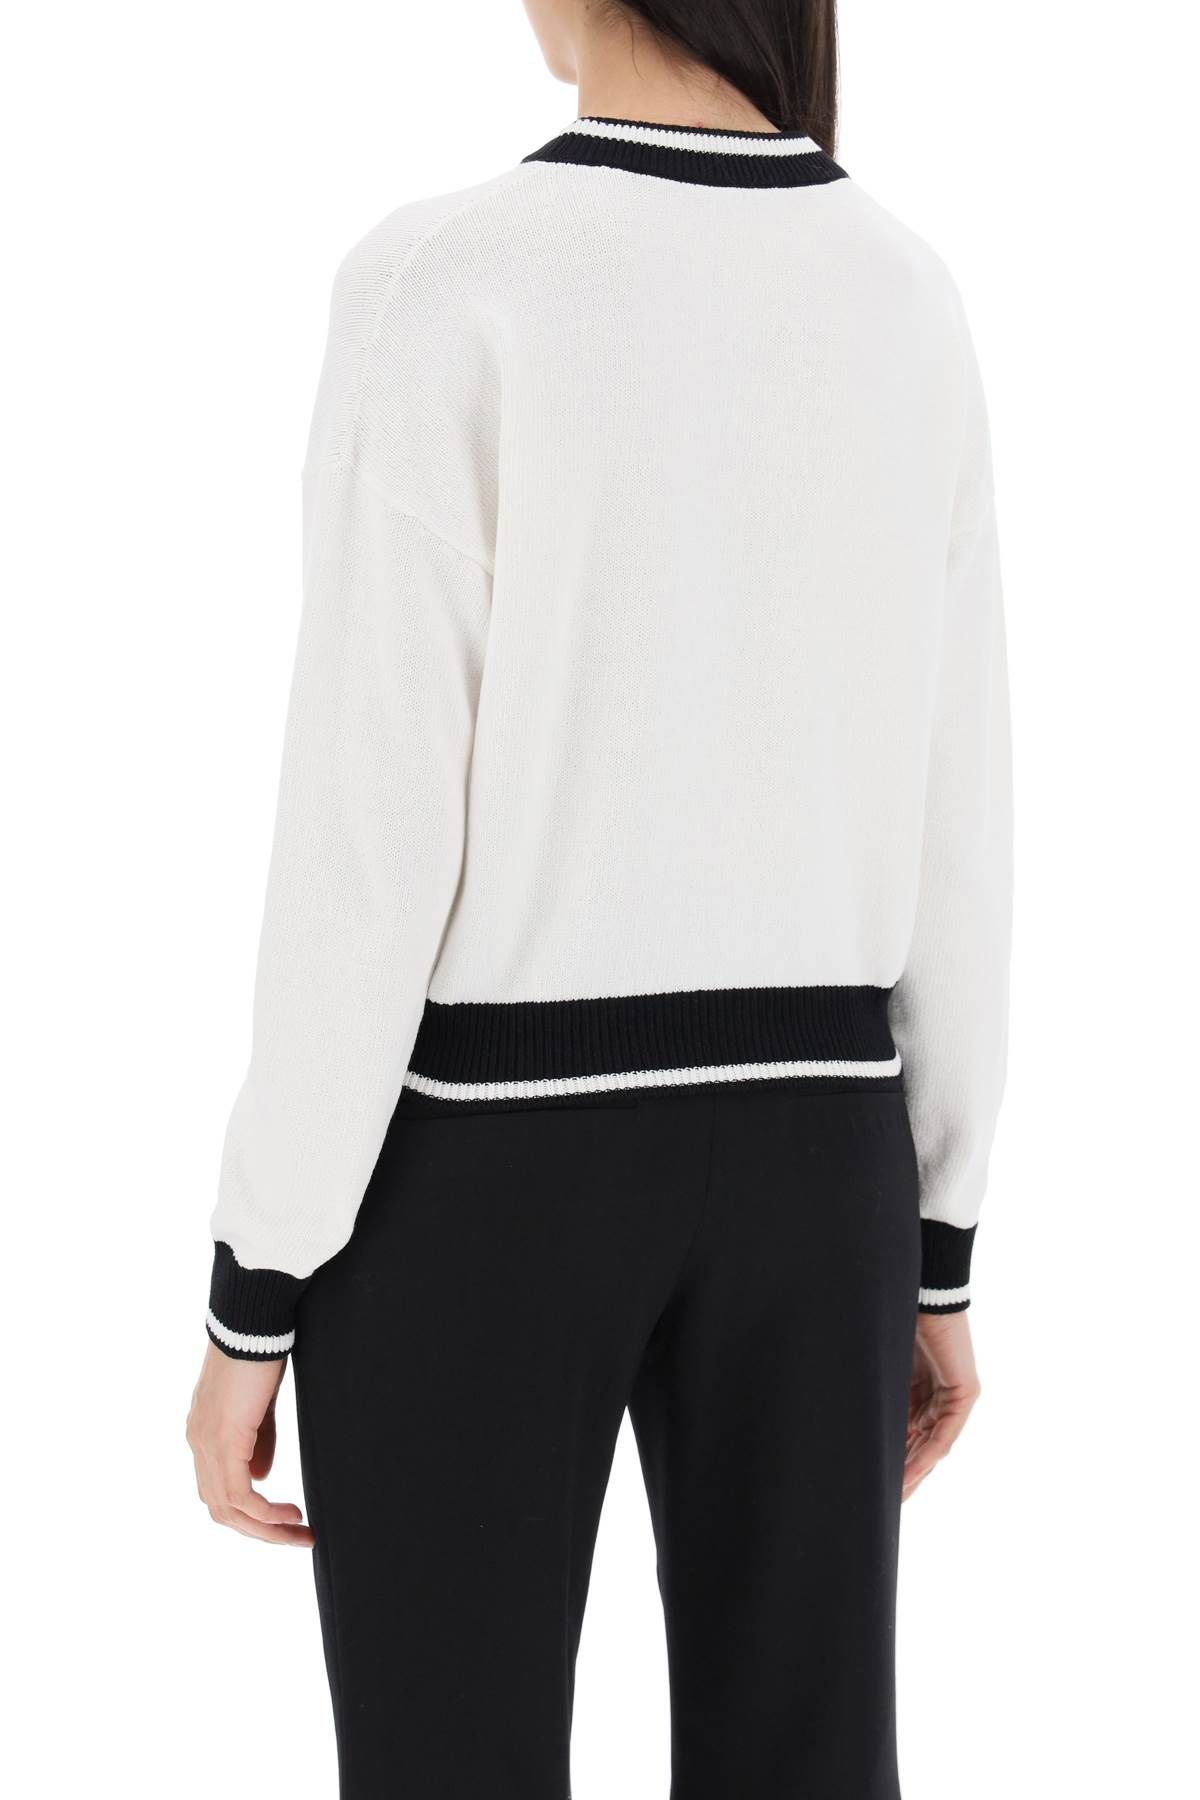 Shop Balmain Embroidered Logo Pullover In White